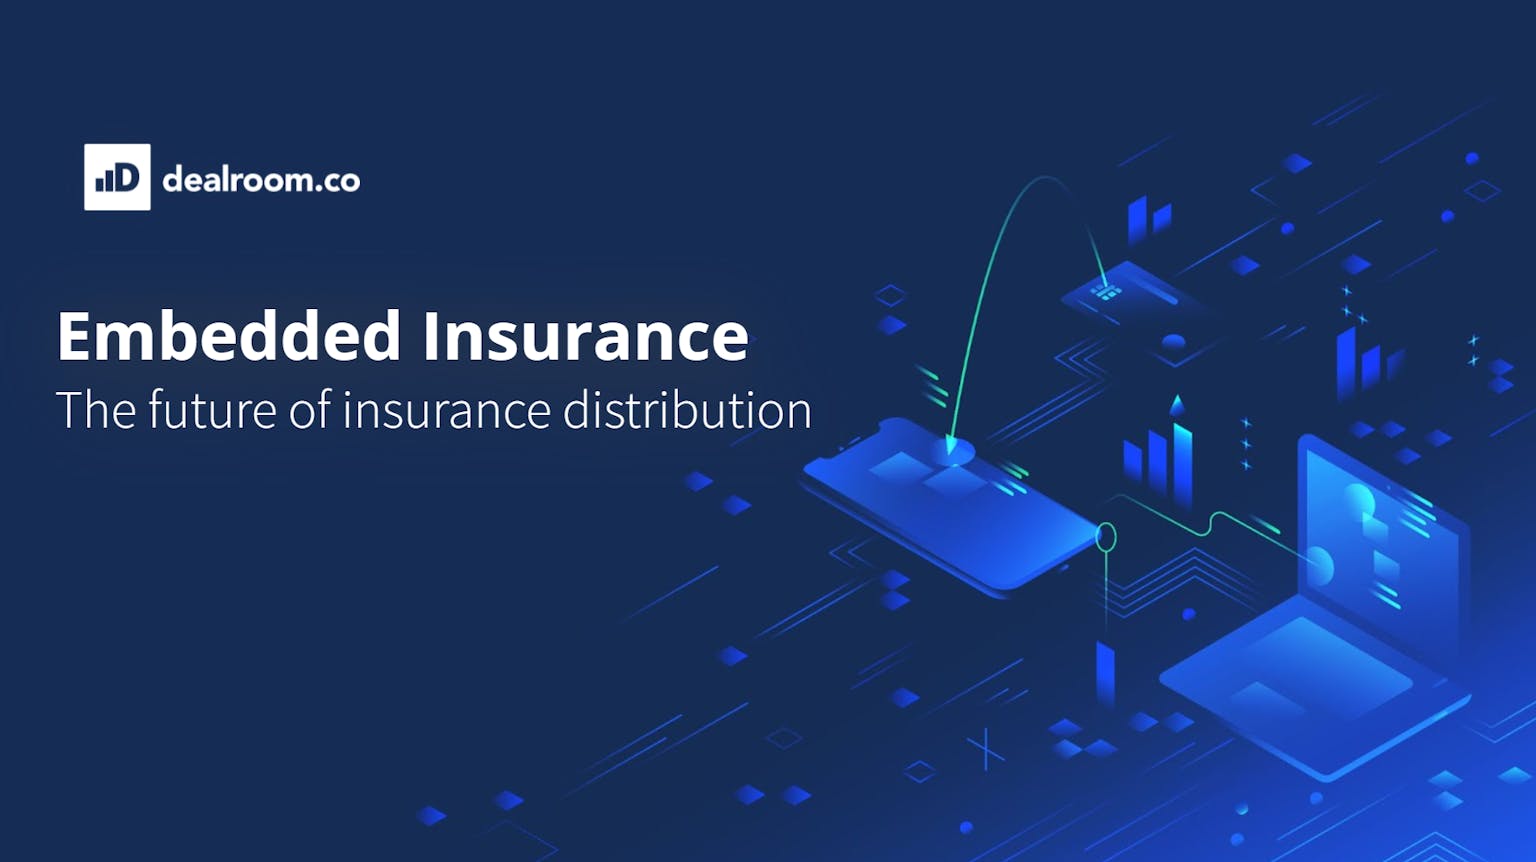 Embedded insurance, the future of insurance distribution